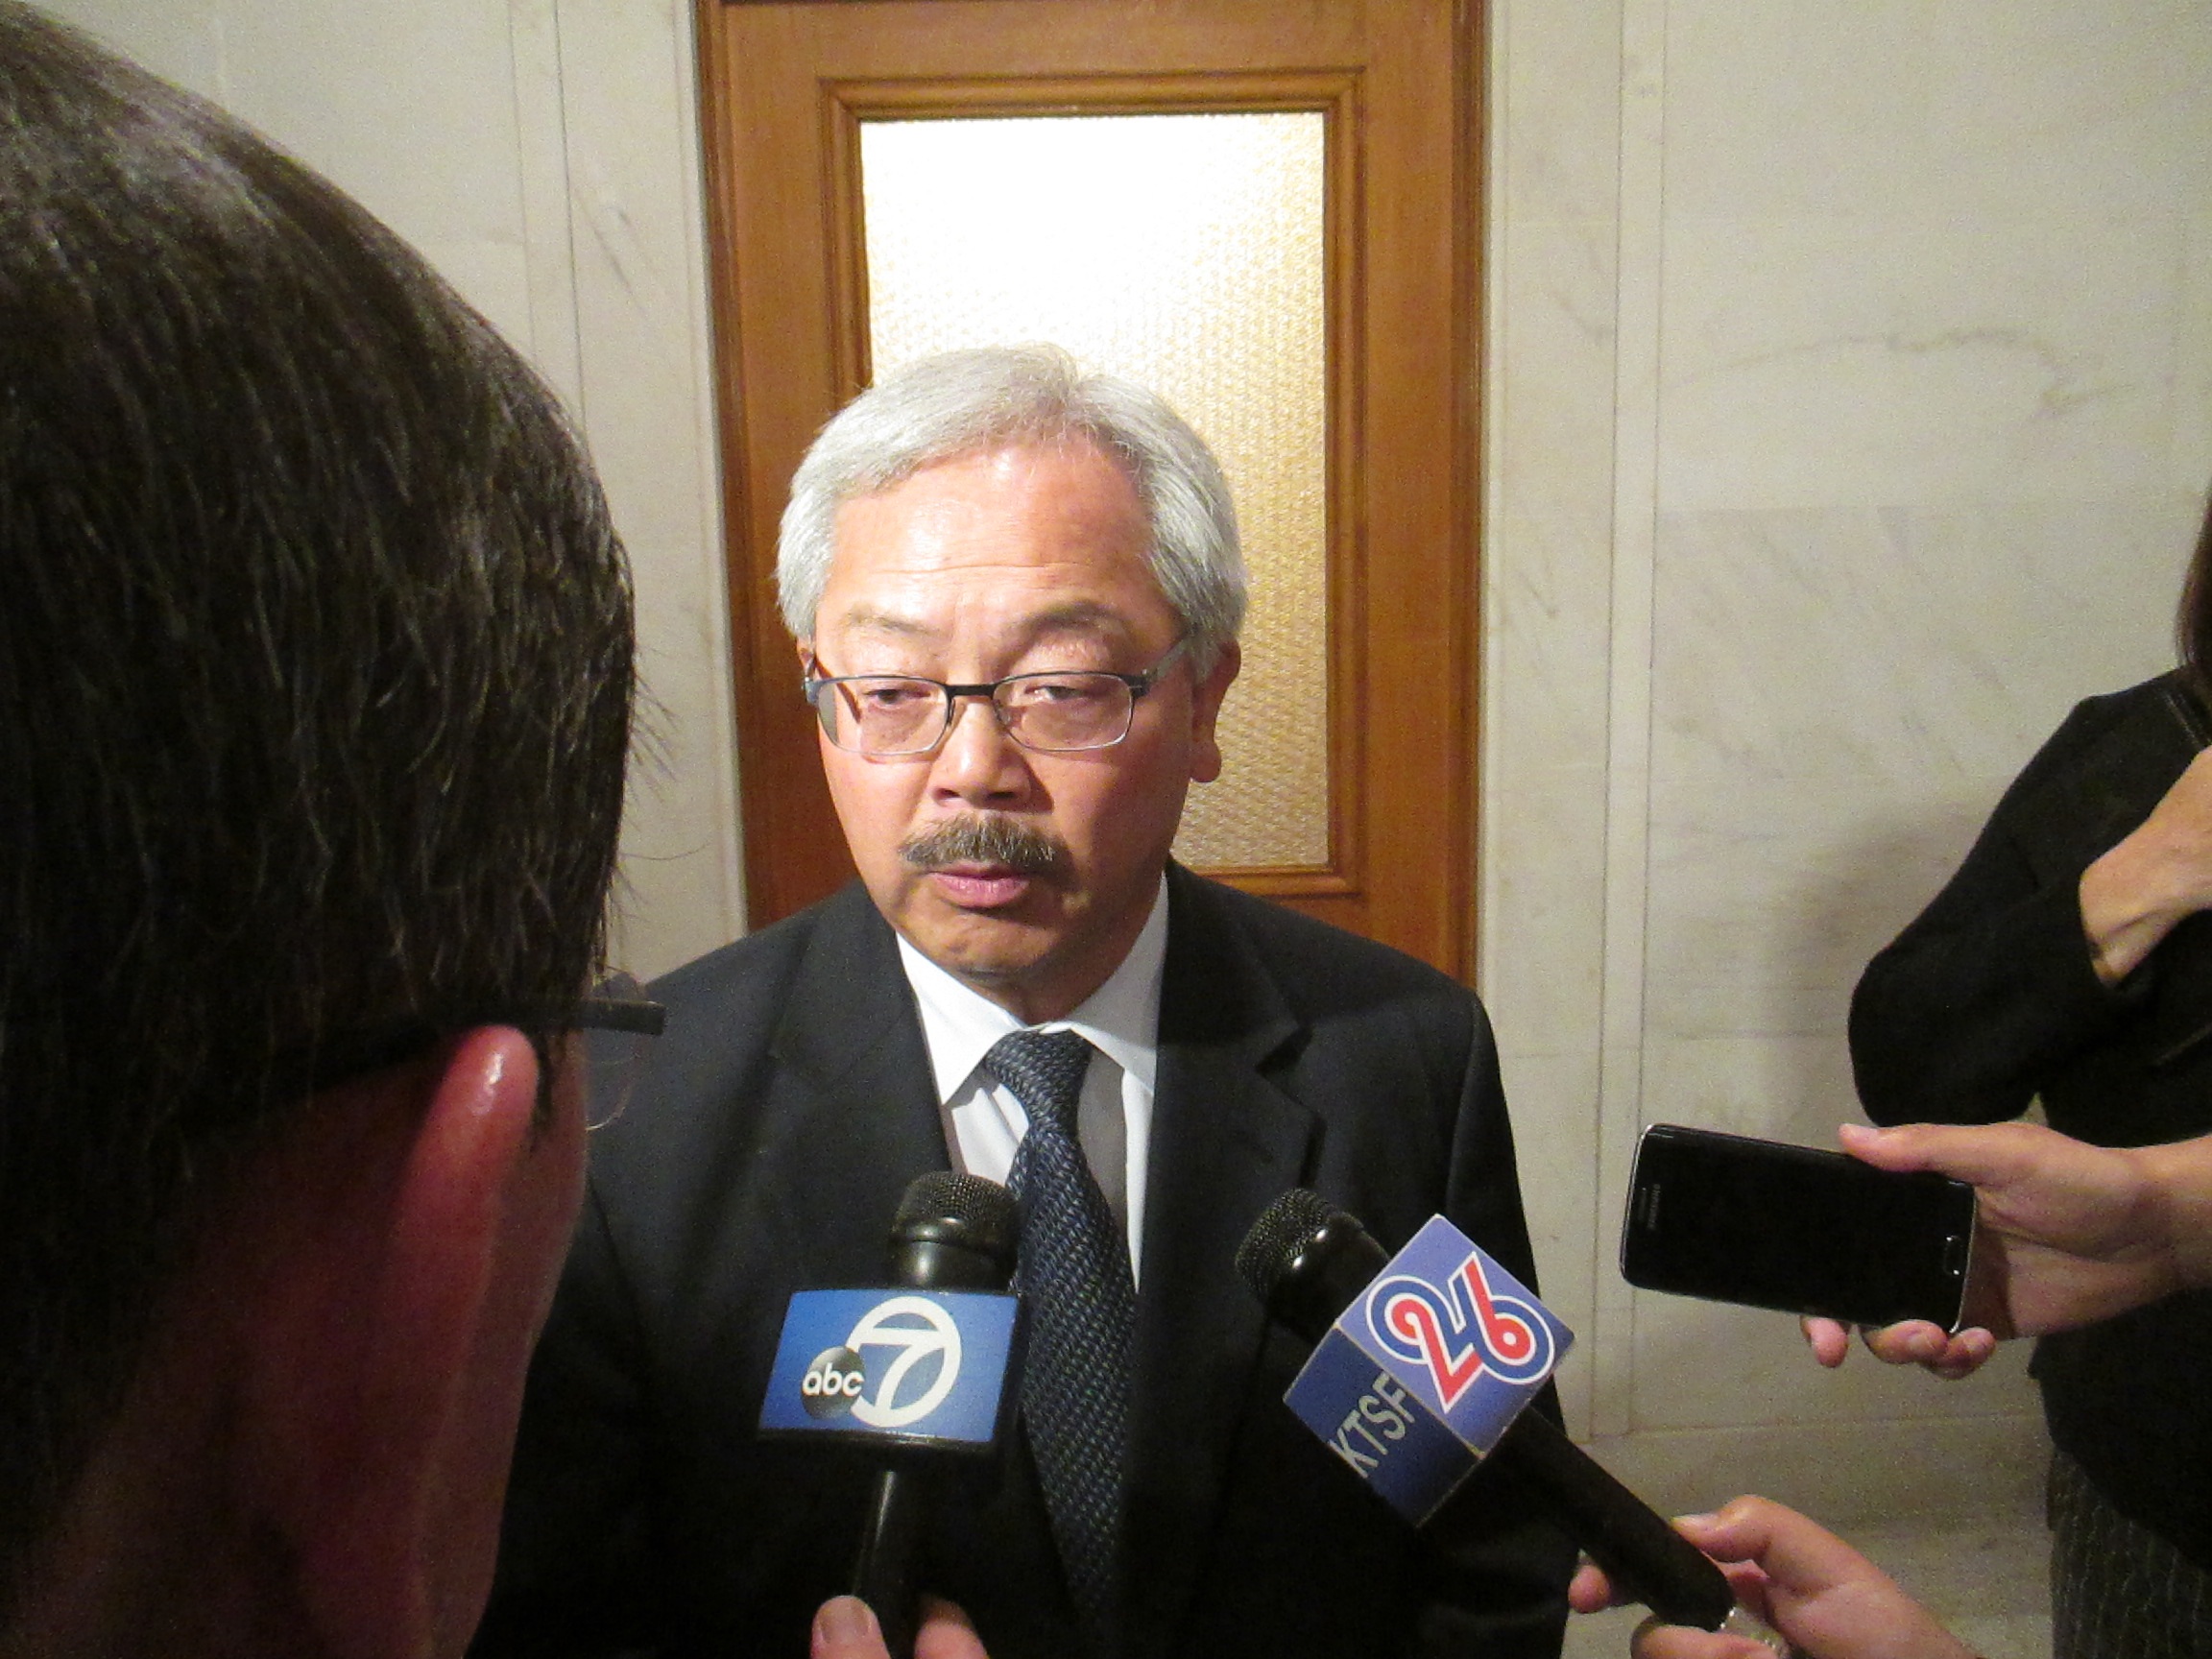 Mayor Lee is cutting a program that could save hundreds from homelessness